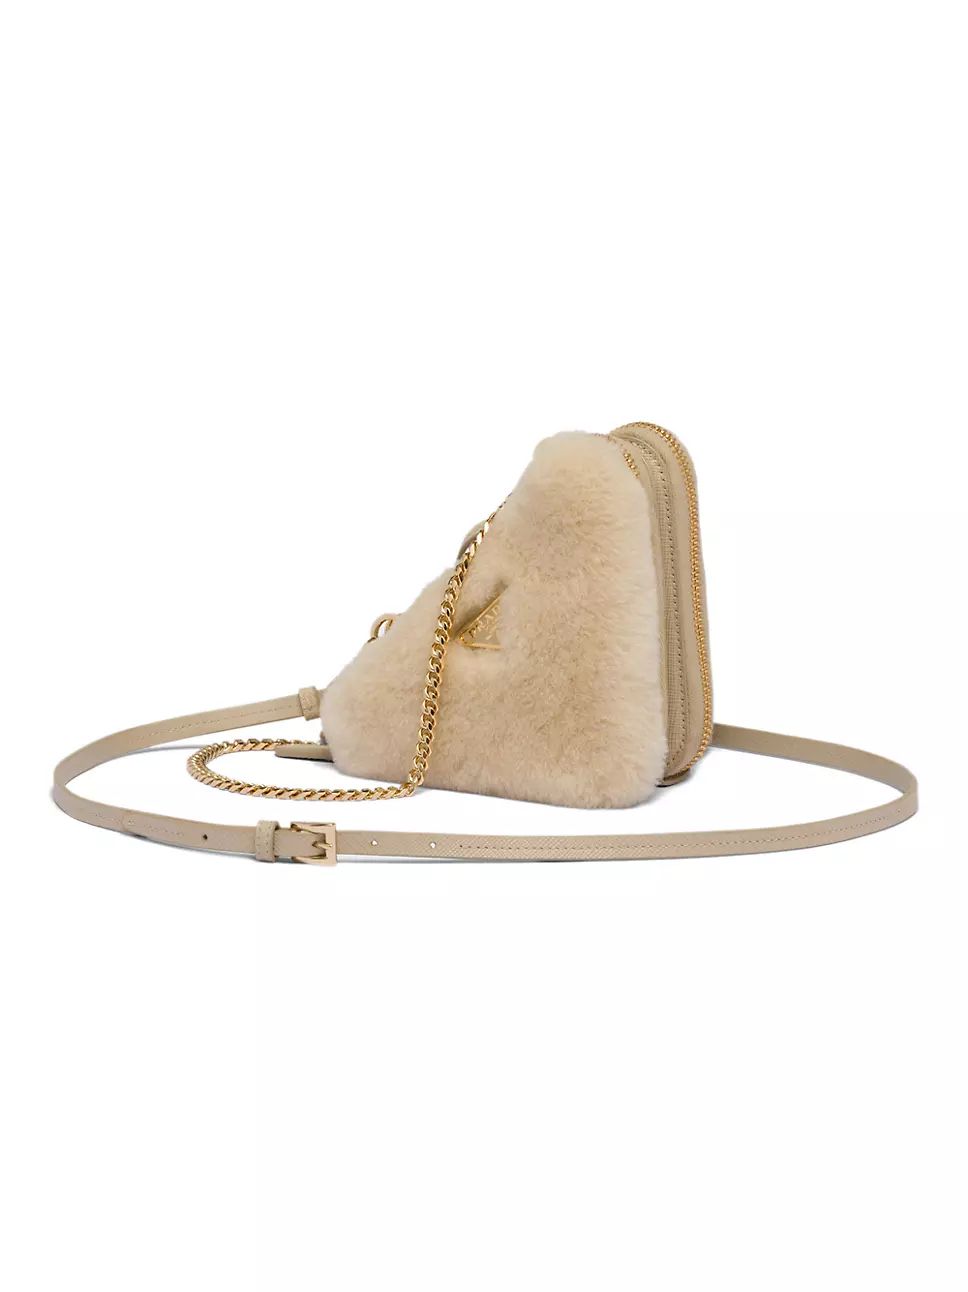 Shearling And Saffiano Leather Mini-Pouch | Saks Fifth Avenue